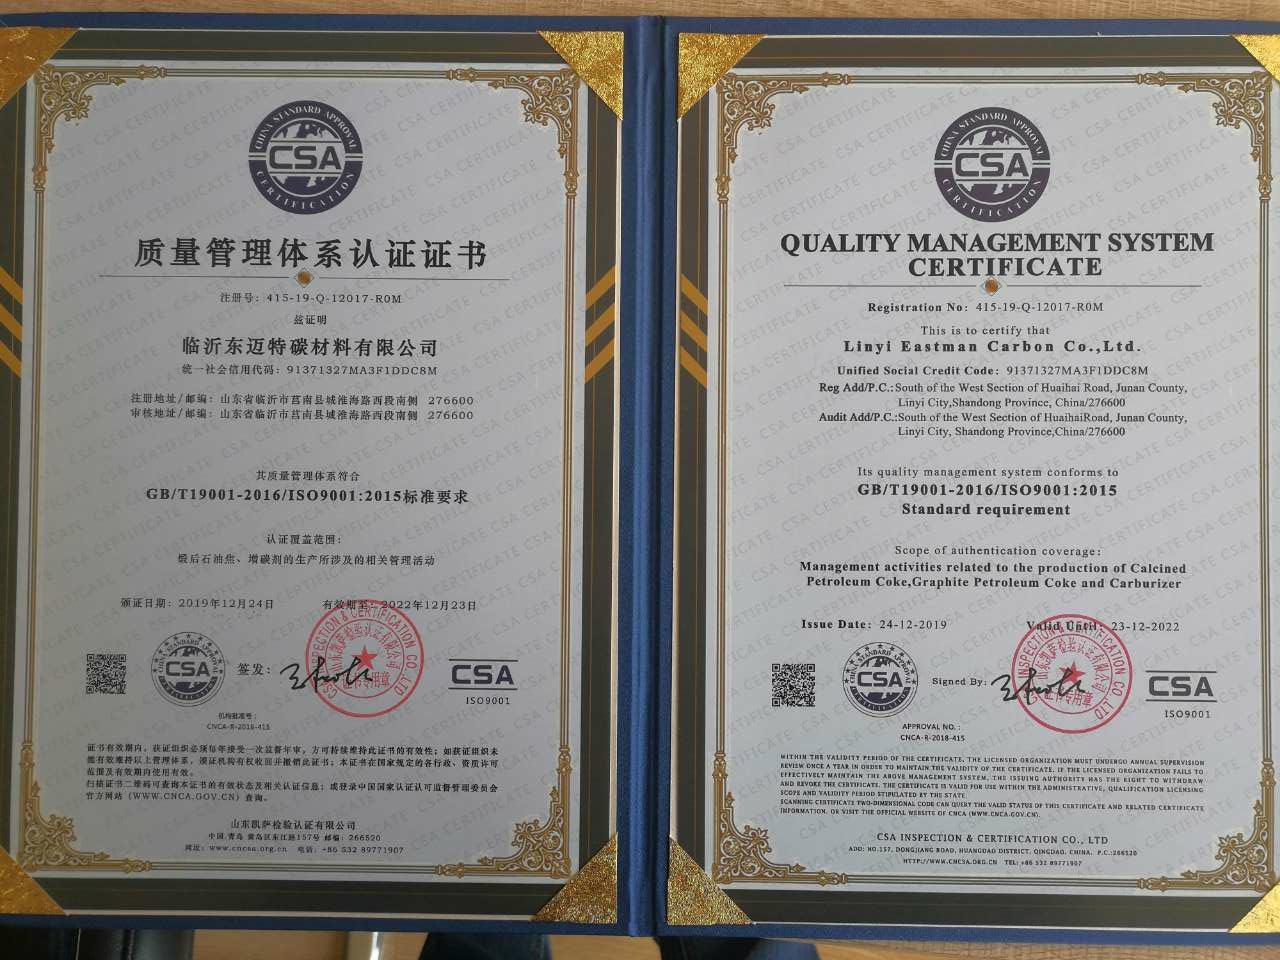 Quality management certificate for CPC